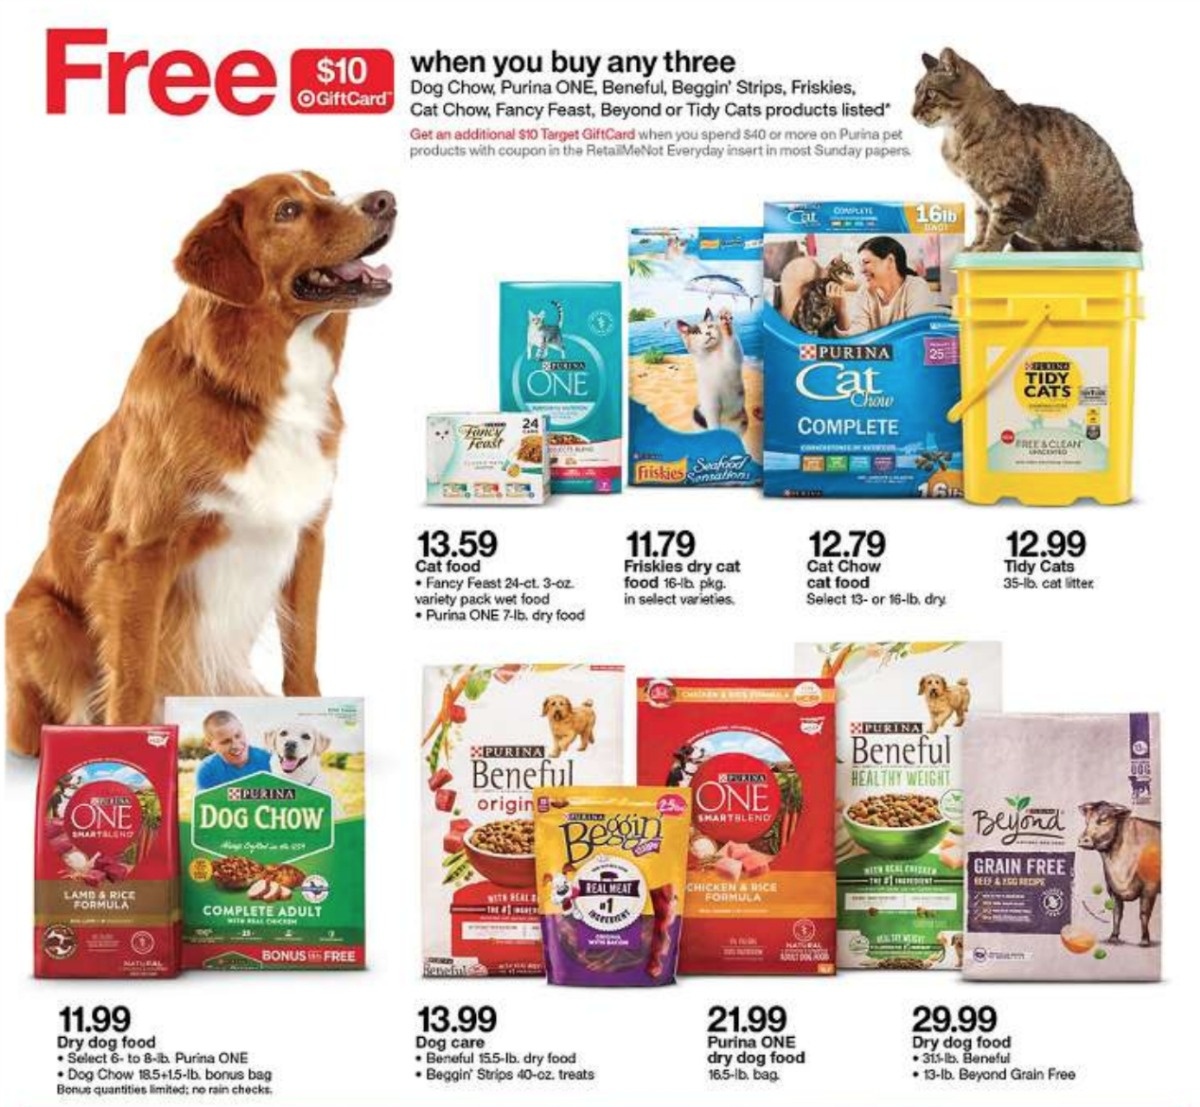 $20 Target Gift Card With $40 Purina Pet Purchase :: Southern Savers - Free Printable Coupons For Purina One Dog Food